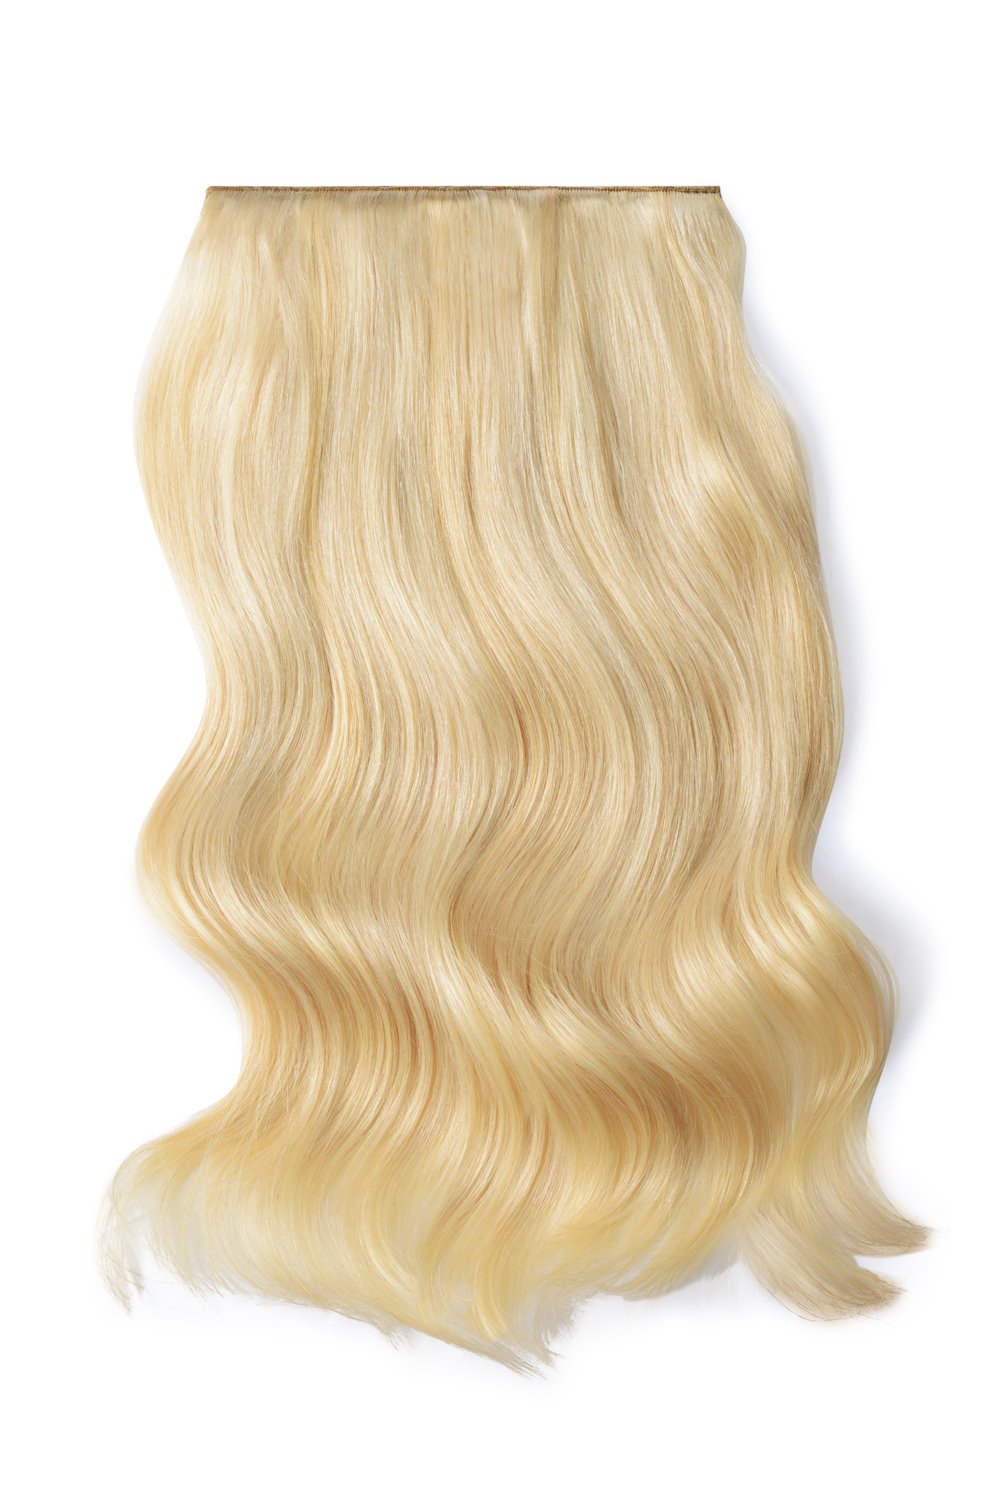 Double Wefted Full Head Remy Clip in Human Hair Extensions - Ash Blonde/Bleach Blonde Mix (#22/613)